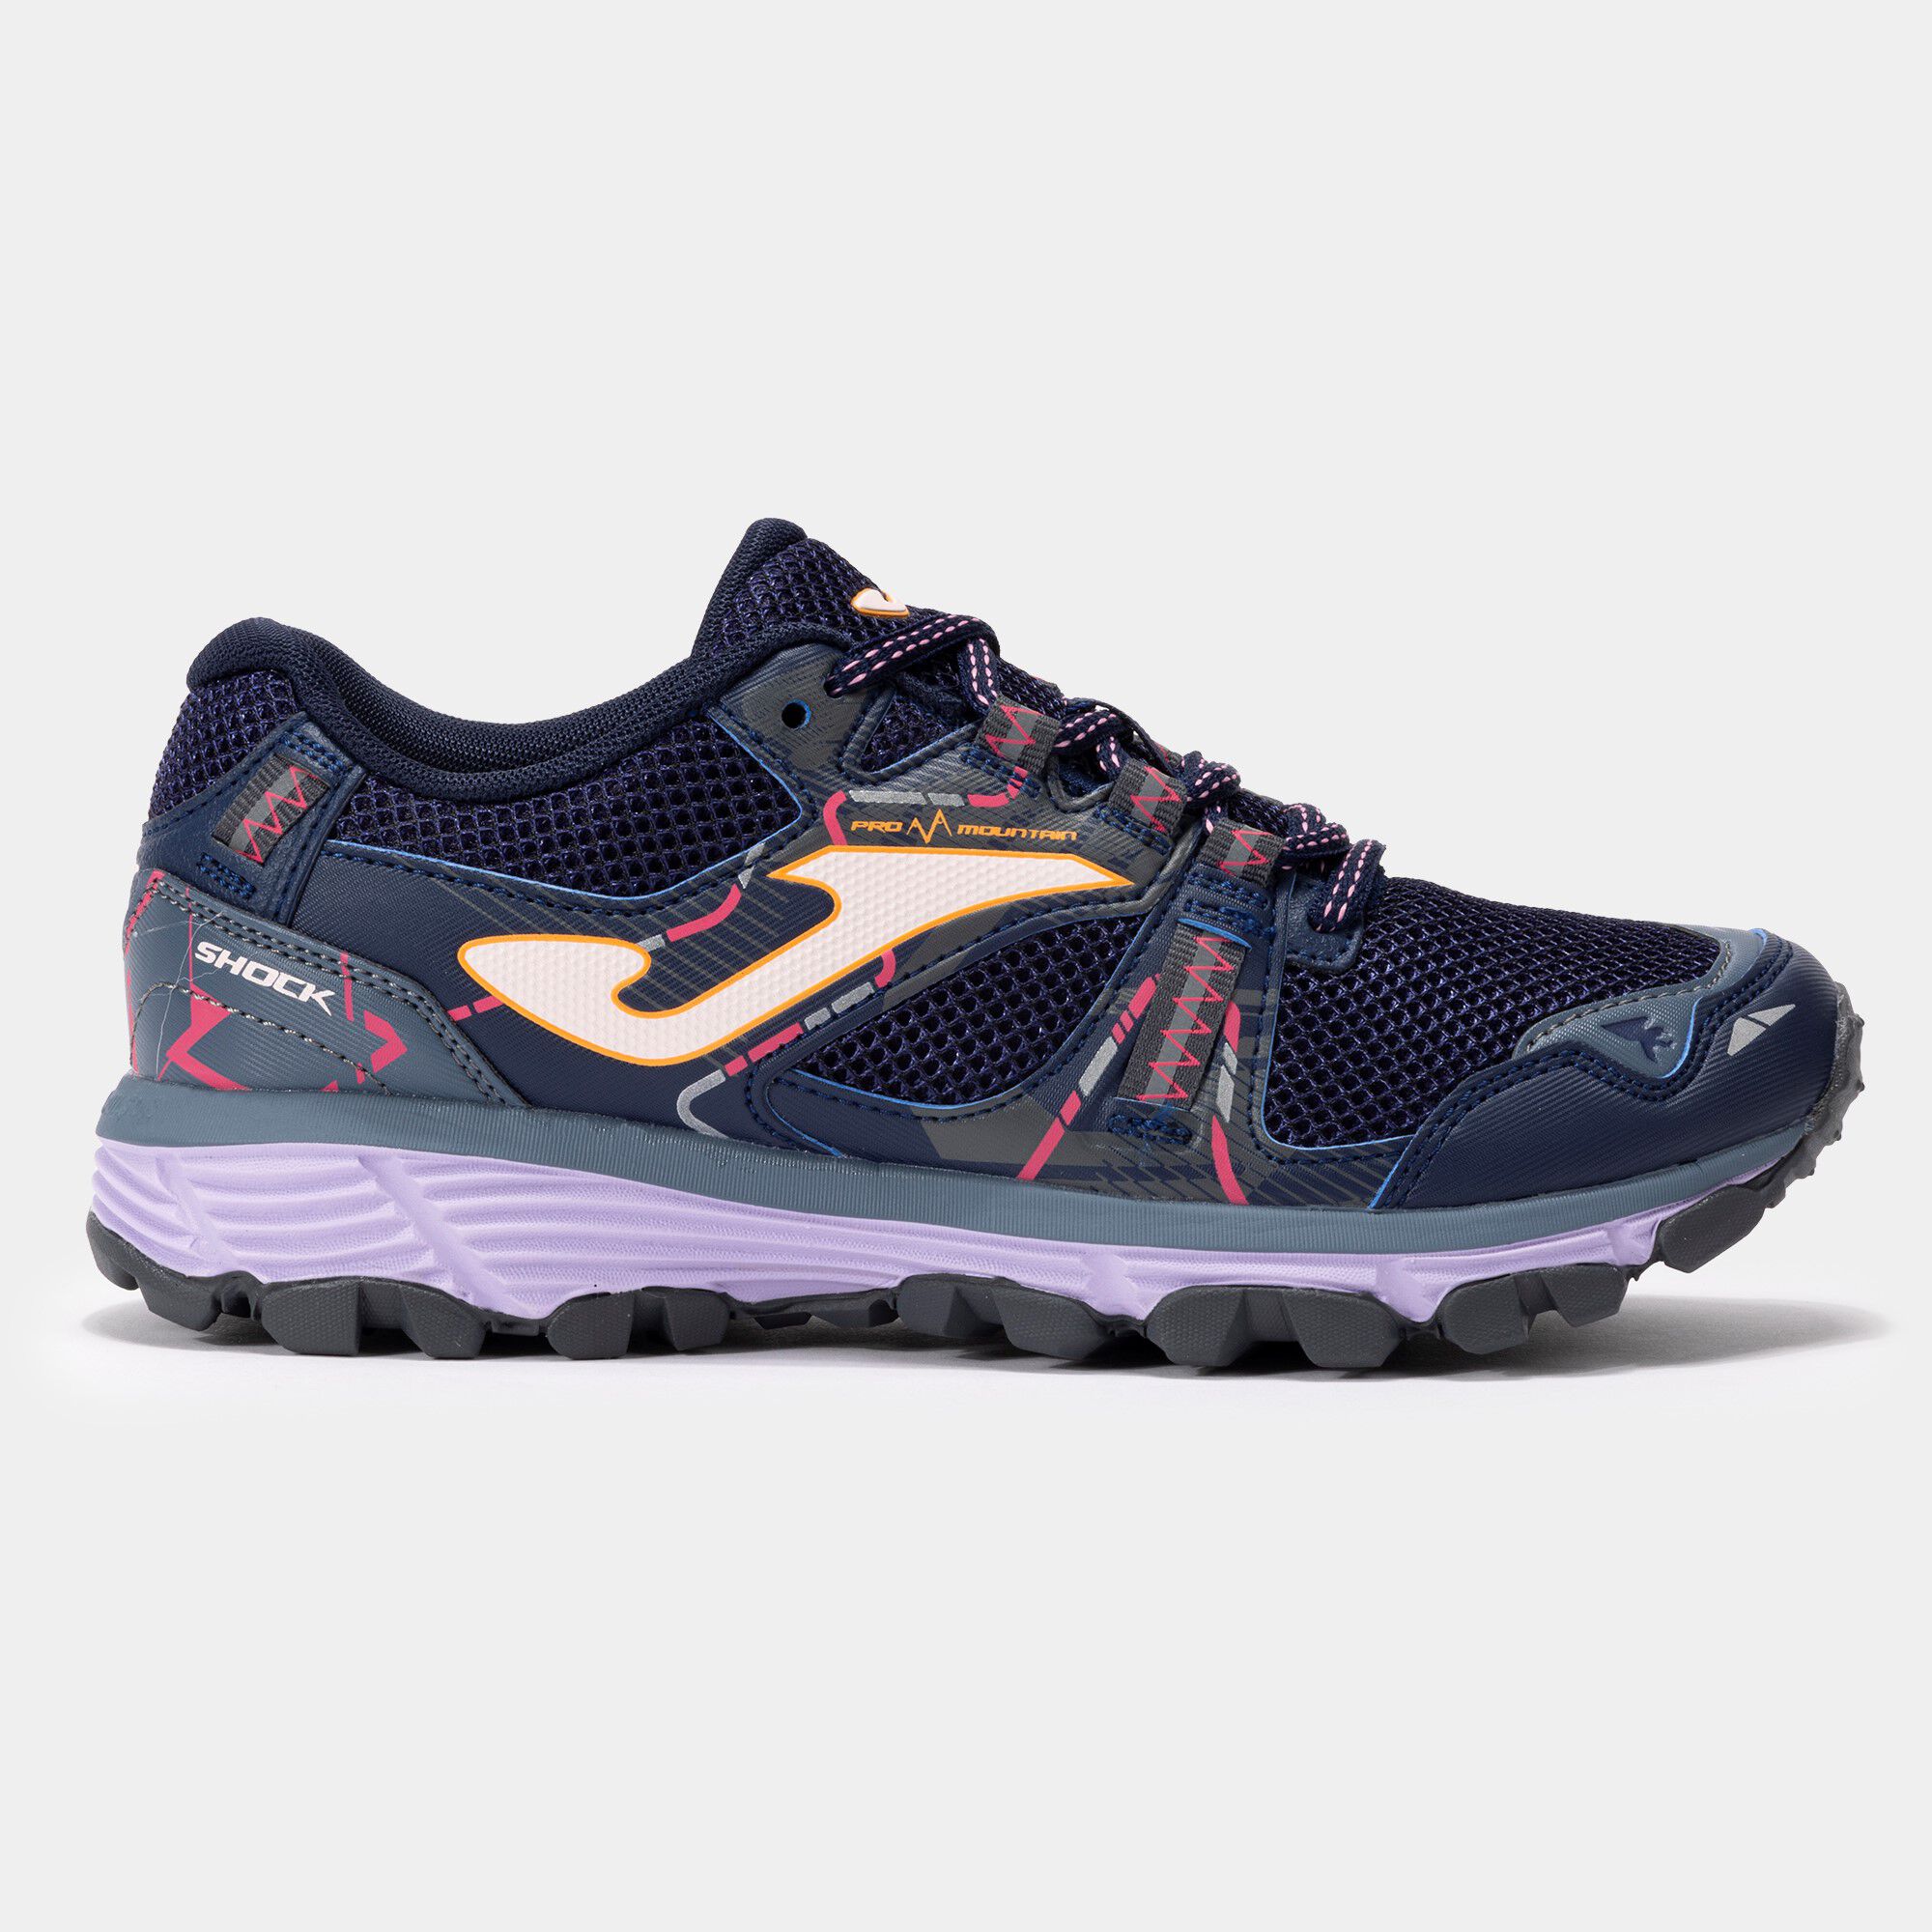 Trail-running shoes Shock Lady 24 woman navy blue